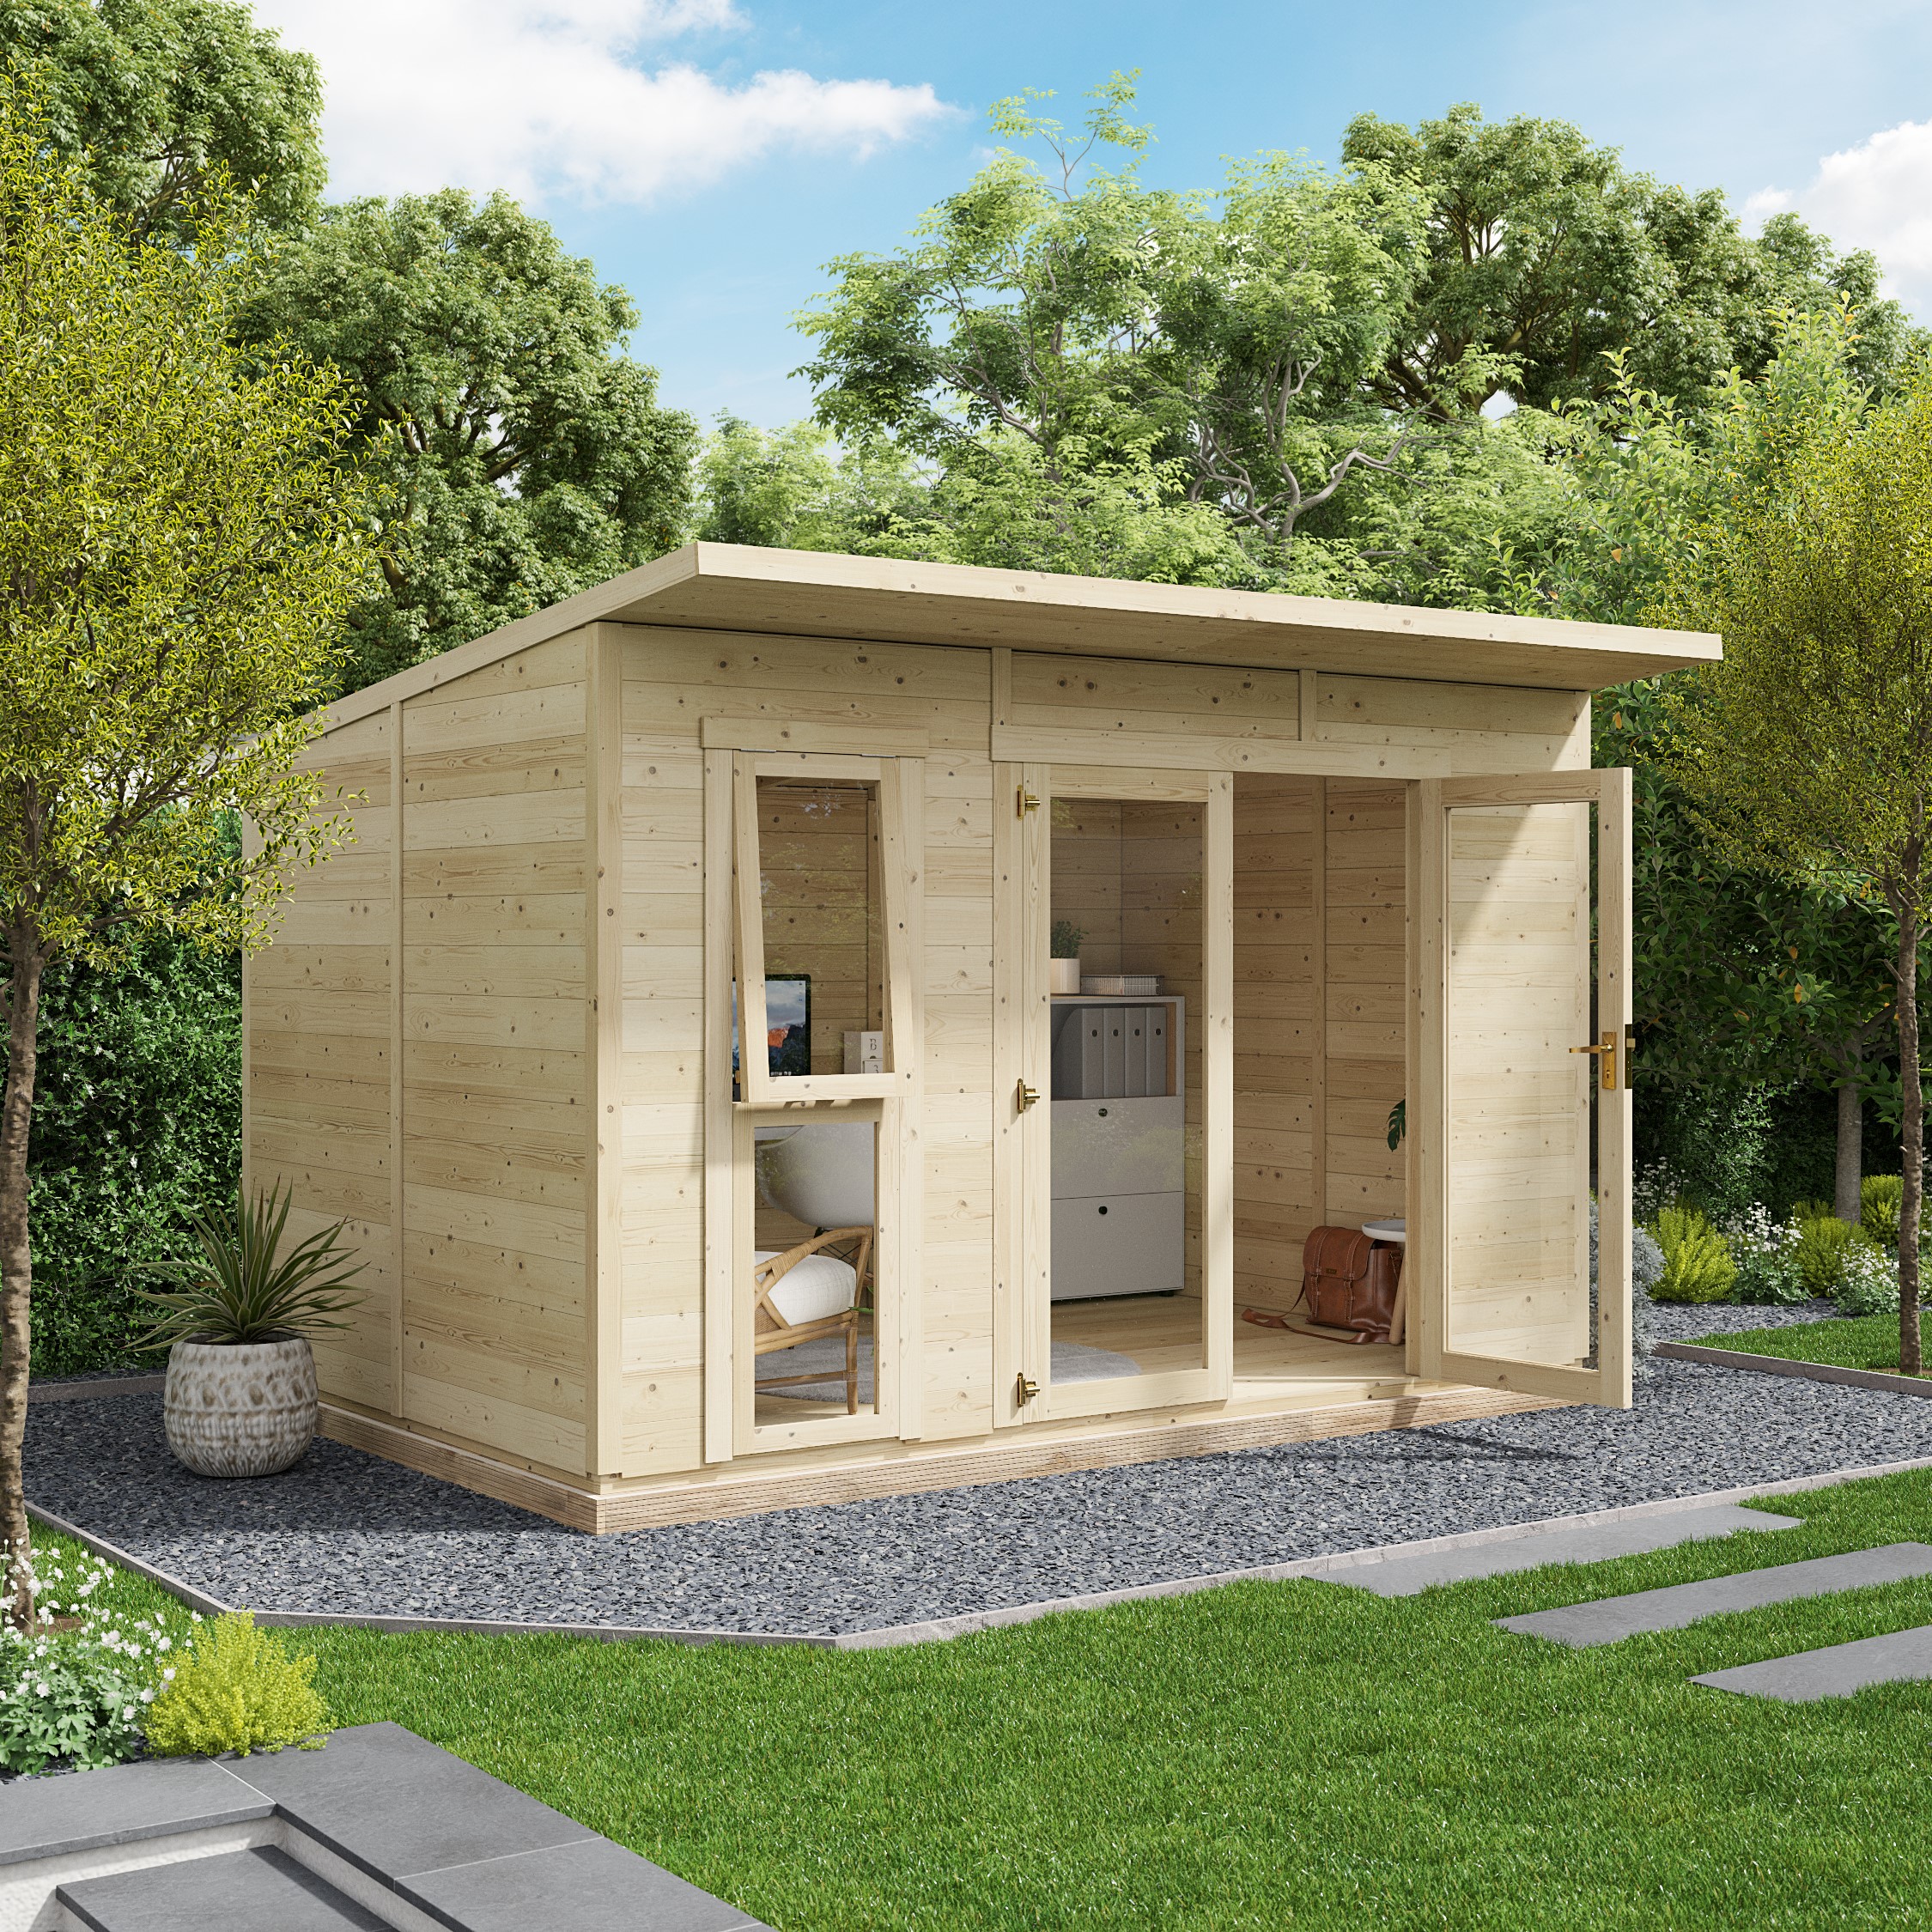 BillyOh Canvas Insulated Garden Room - 12ft x 8ft (3.5x2.5m)